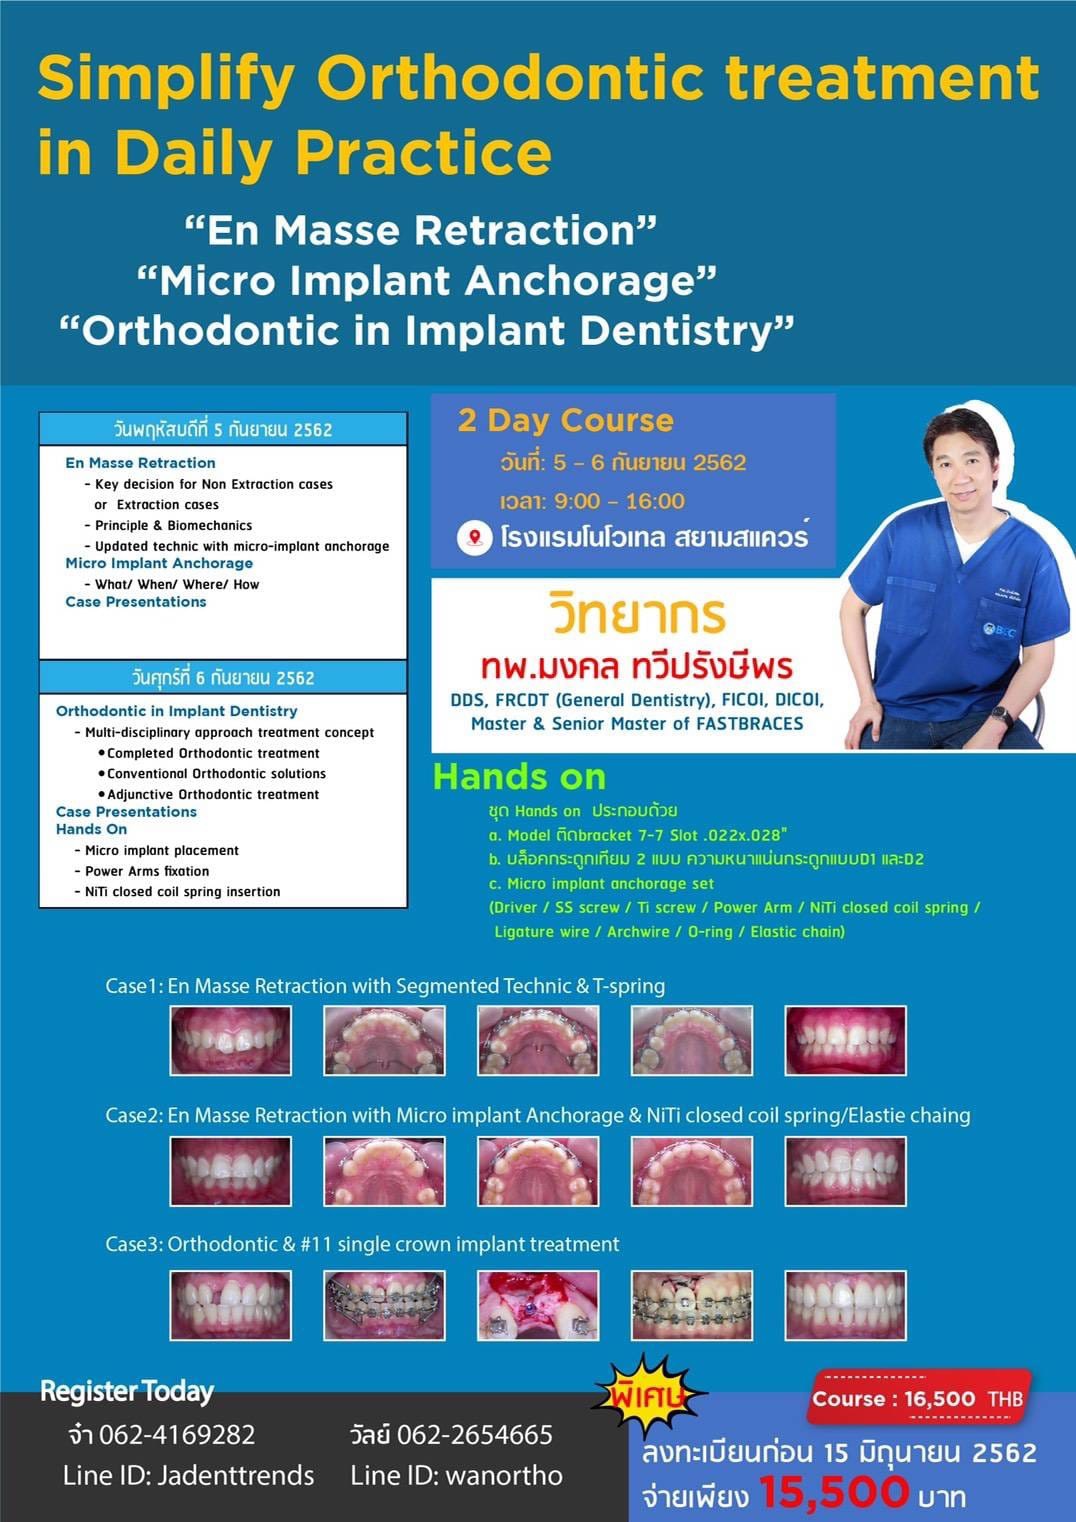 Simplify Orthodontic treatment in Daily Practice